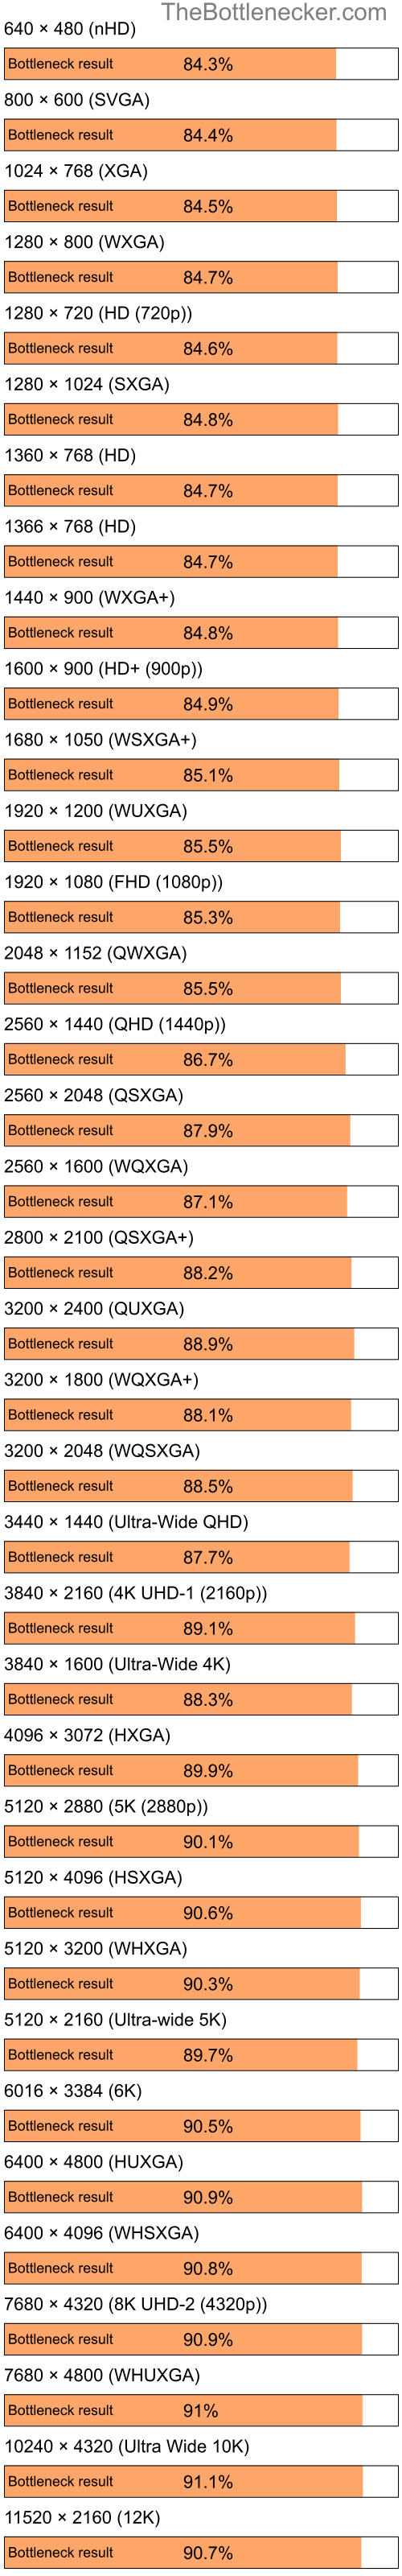 Bottleneck results by resolution for Intel Pentium 4 and NVIDIA GeForce 6150SE in Graphic Card Intense Tasks